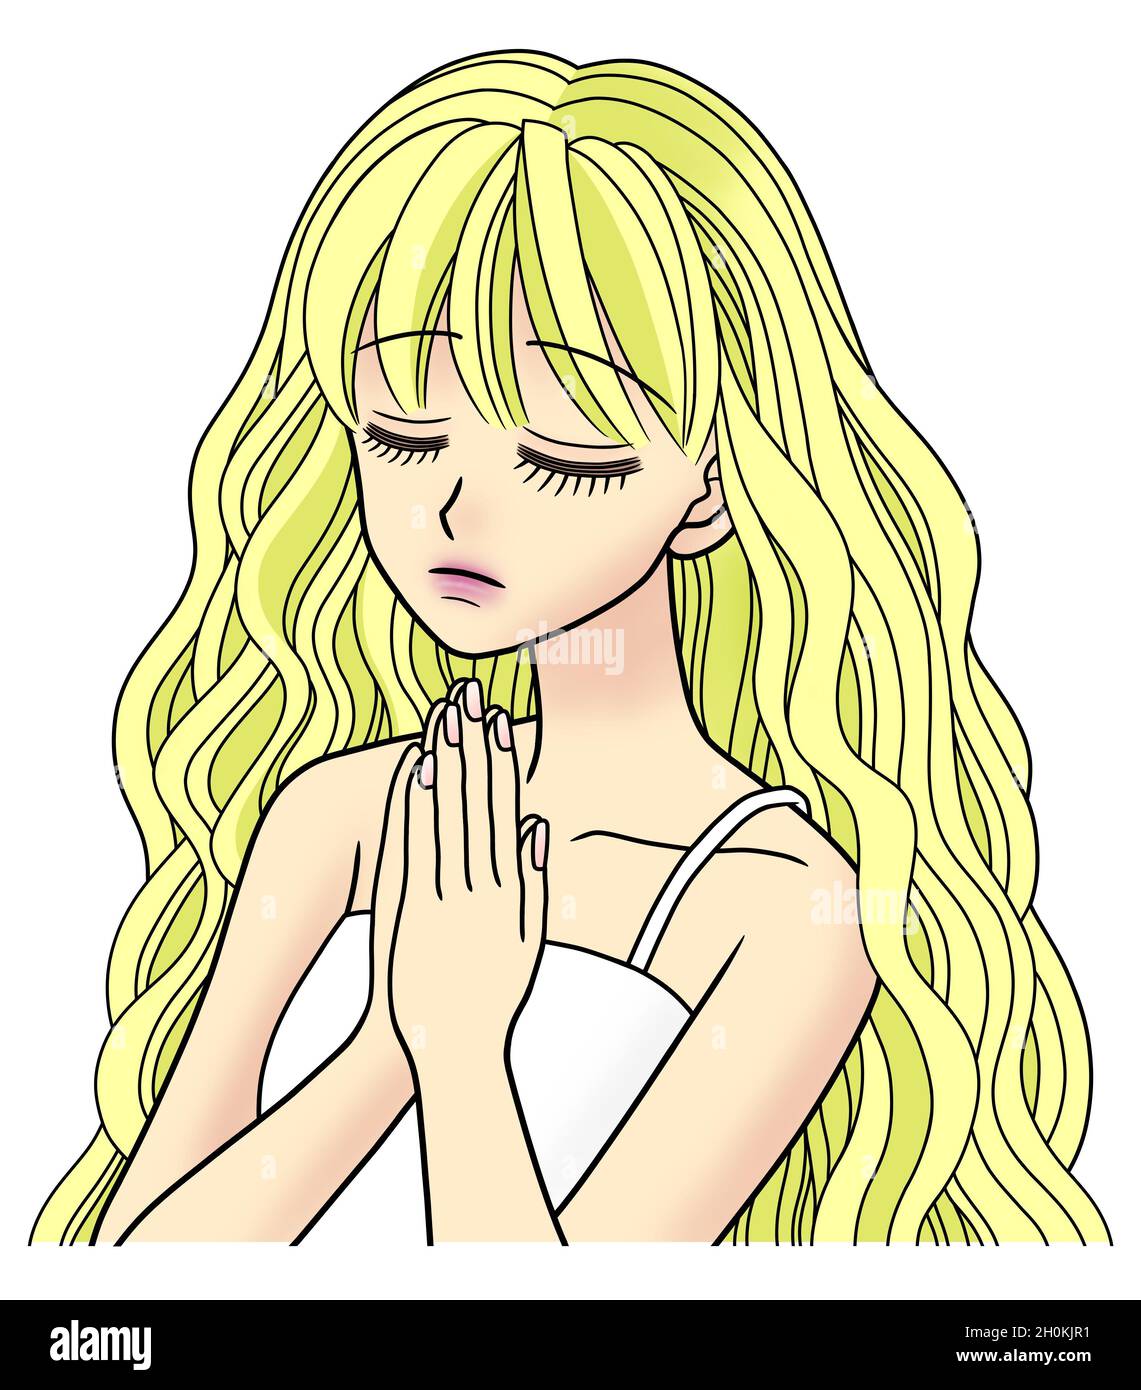 A young woman closing her eyes and holding her hands together in prayer. Stock Photo